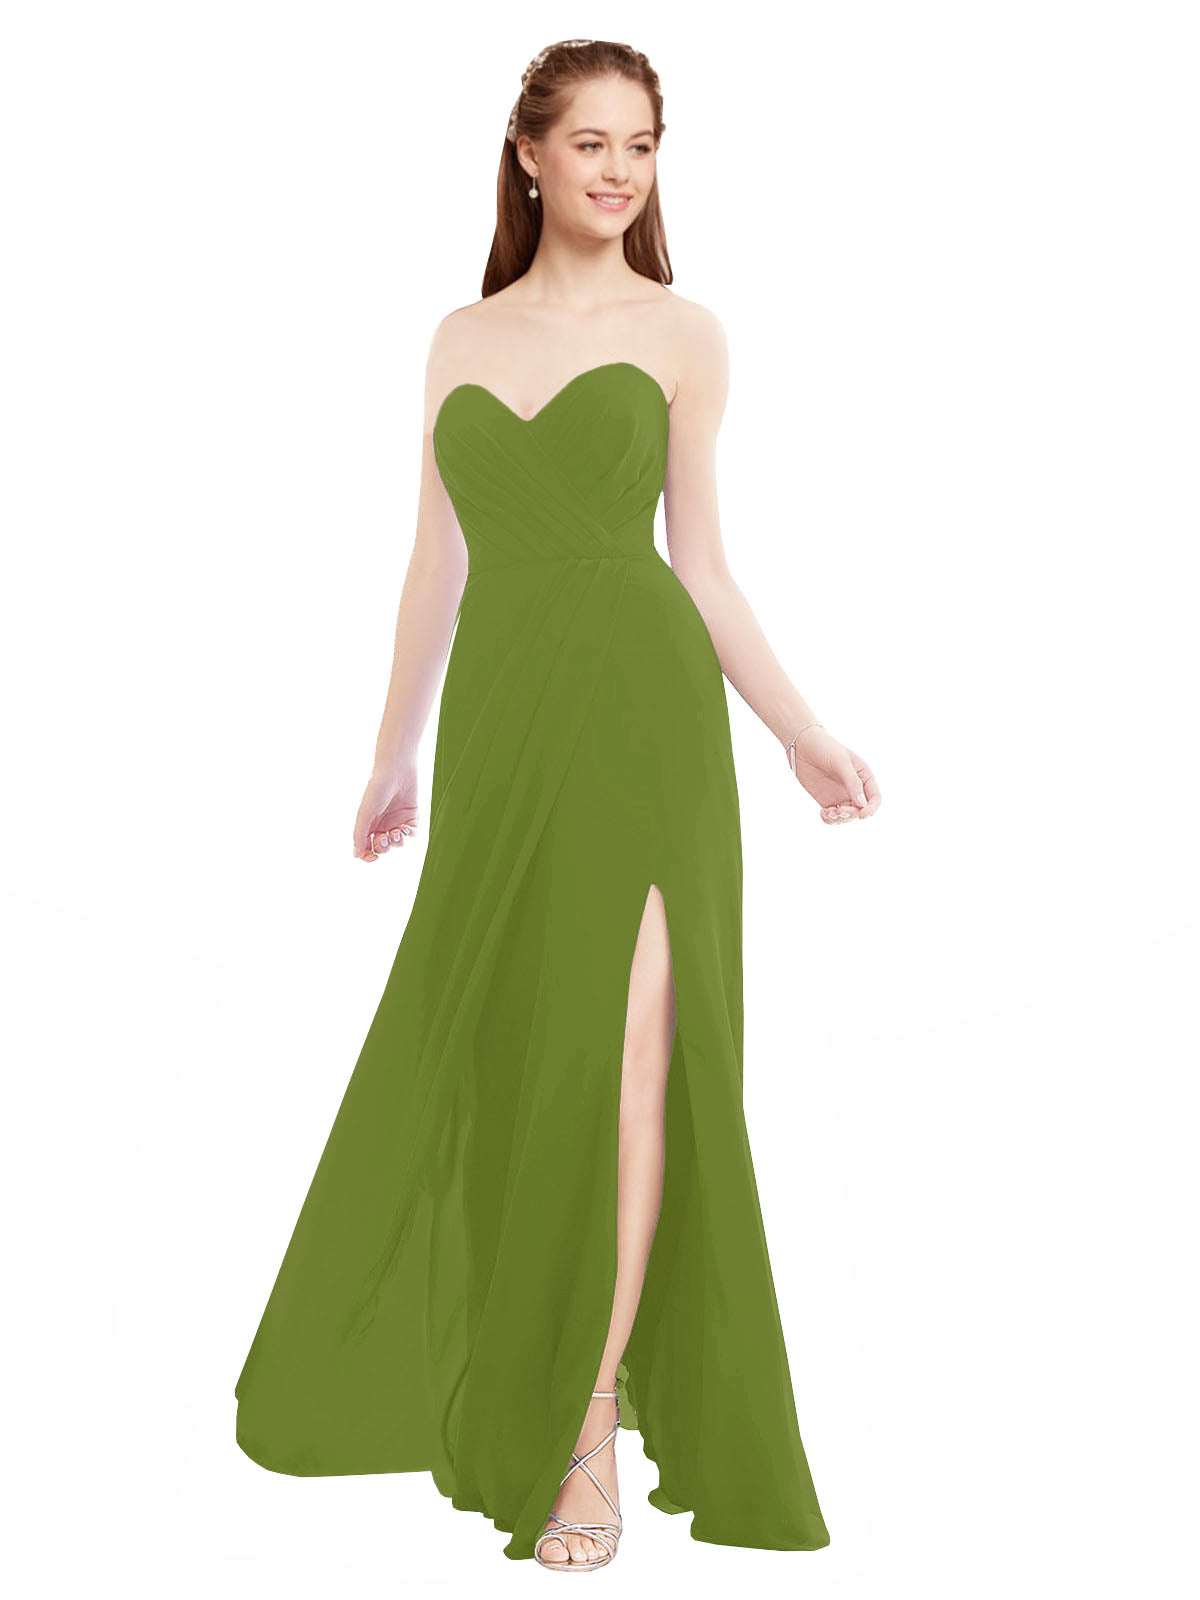 Olive Green A-Line Sweetheart Strapless Sleeveless Long Bridesmaid Dress Meadow